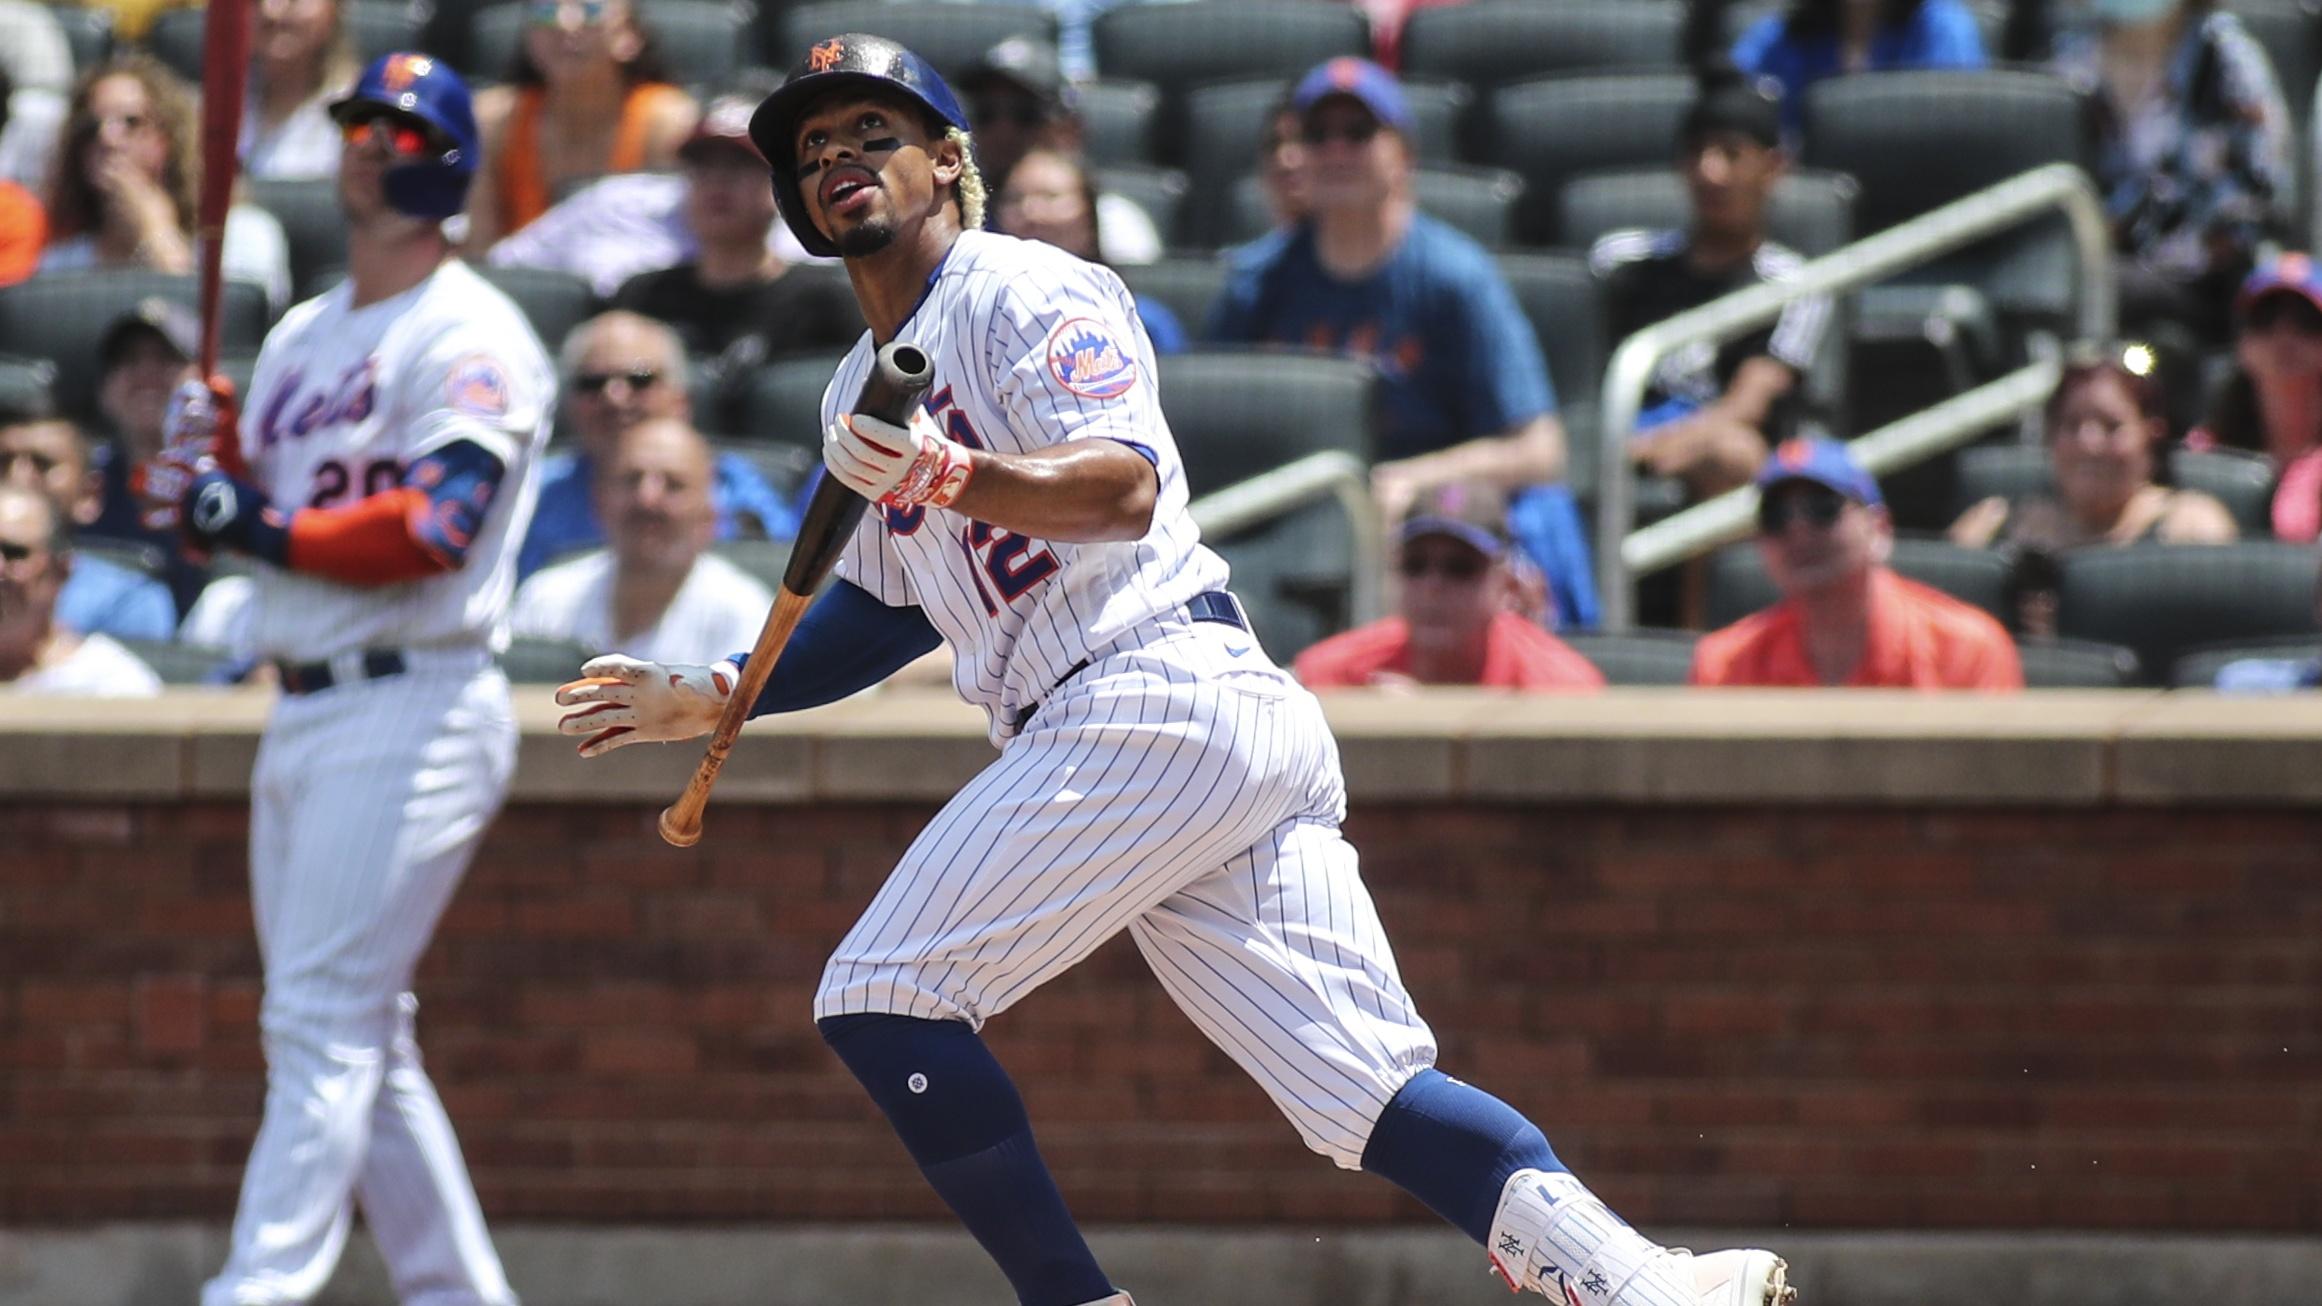 Jun 27, 2021; New York City, New York, USA; New York Mets shortstop Francisco Lindor (12) watches as a ball he hits falls in for a double in the first inning against the Philadelphia Phillies at Citi Field. / © Wendell Cruz-USA TODAY Sports